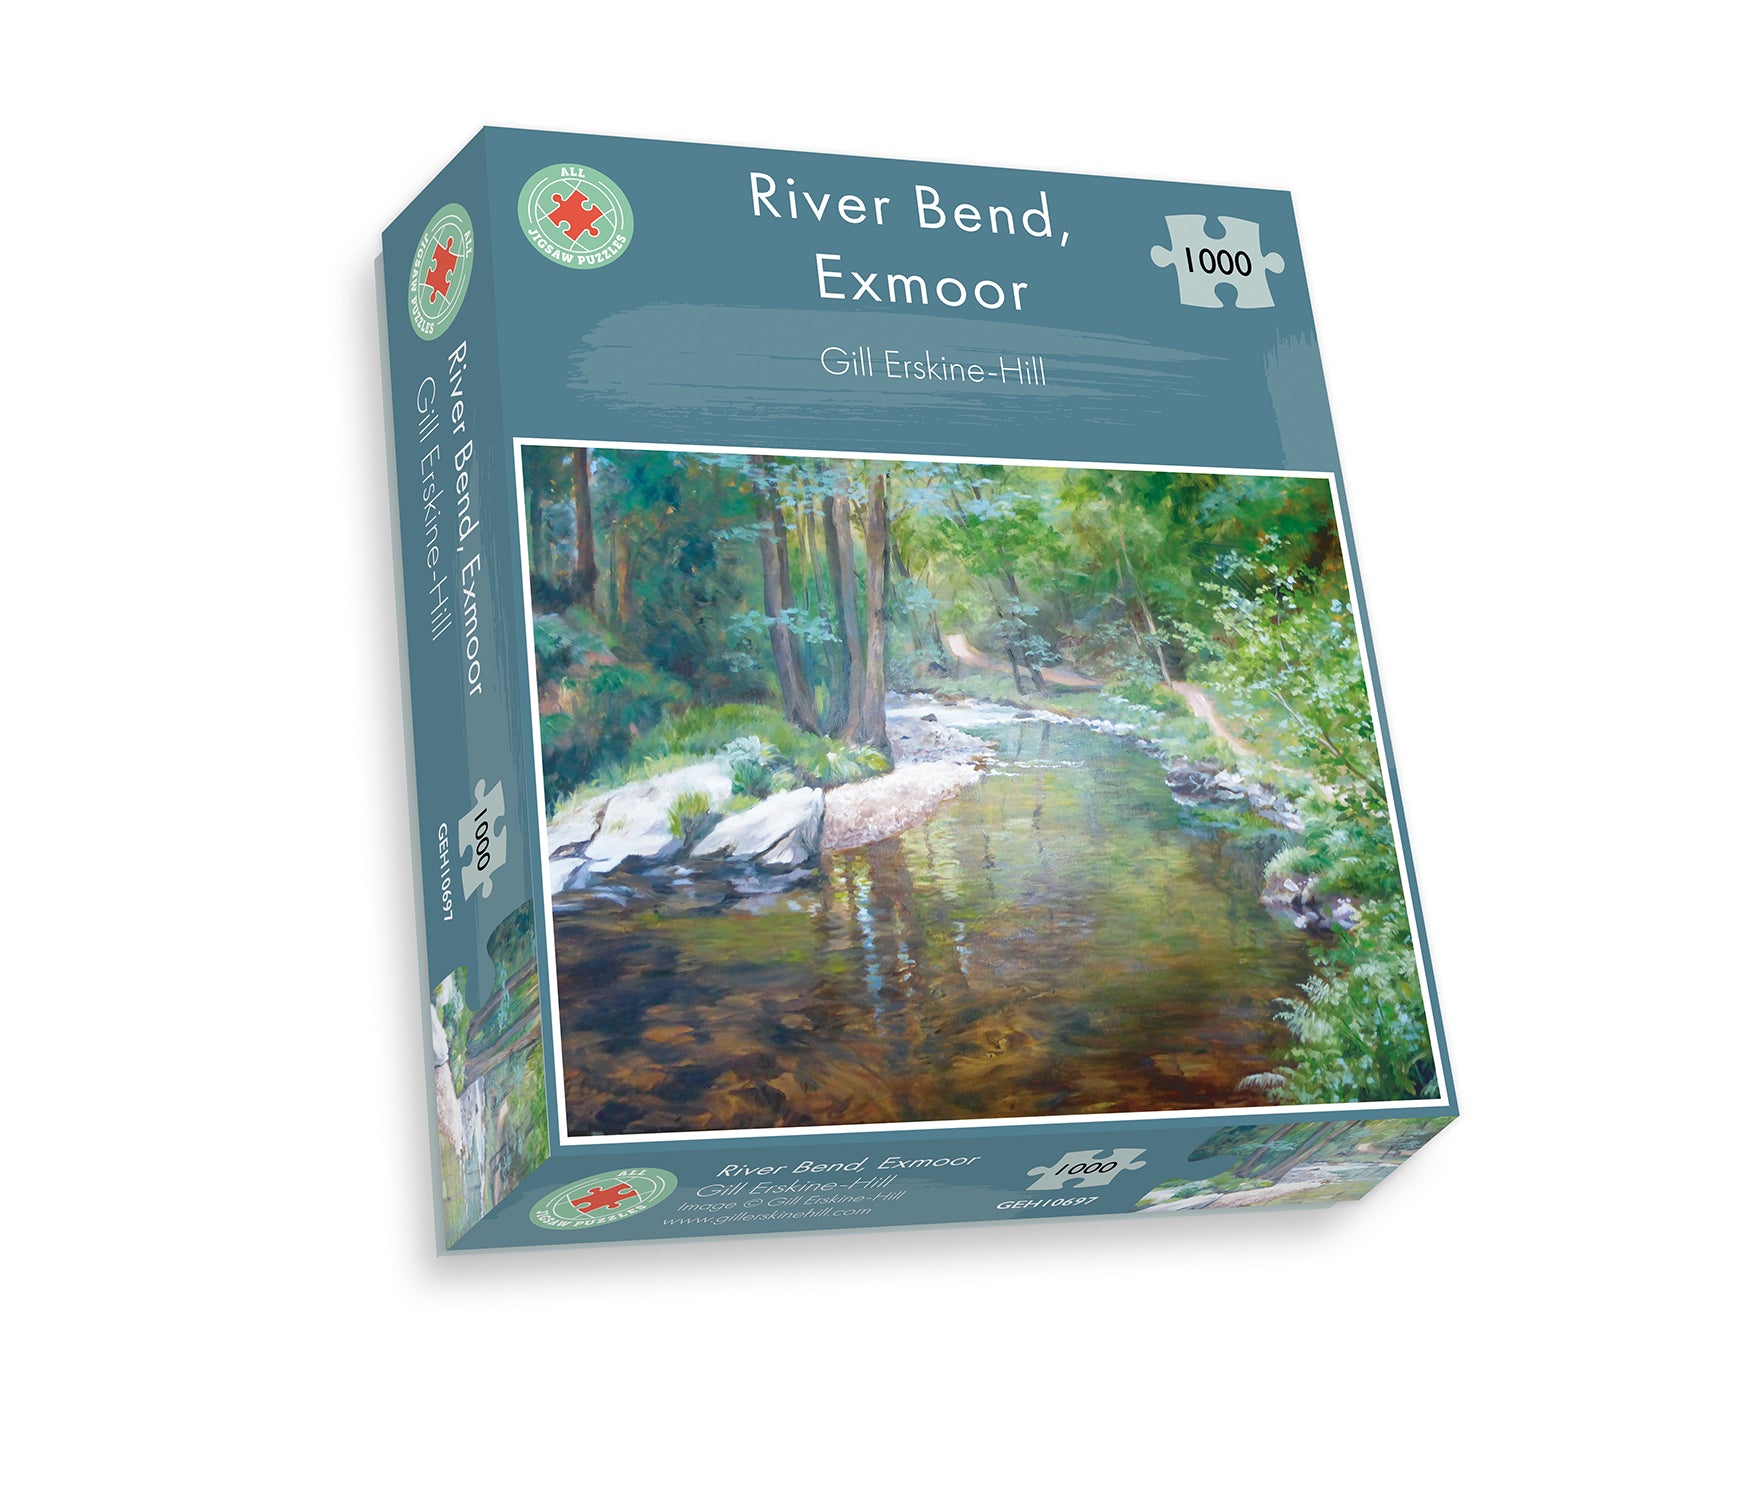 River Bend, Exmoor 1000 Piece Jigsaw Puzzle - Gill Erskine-HIll